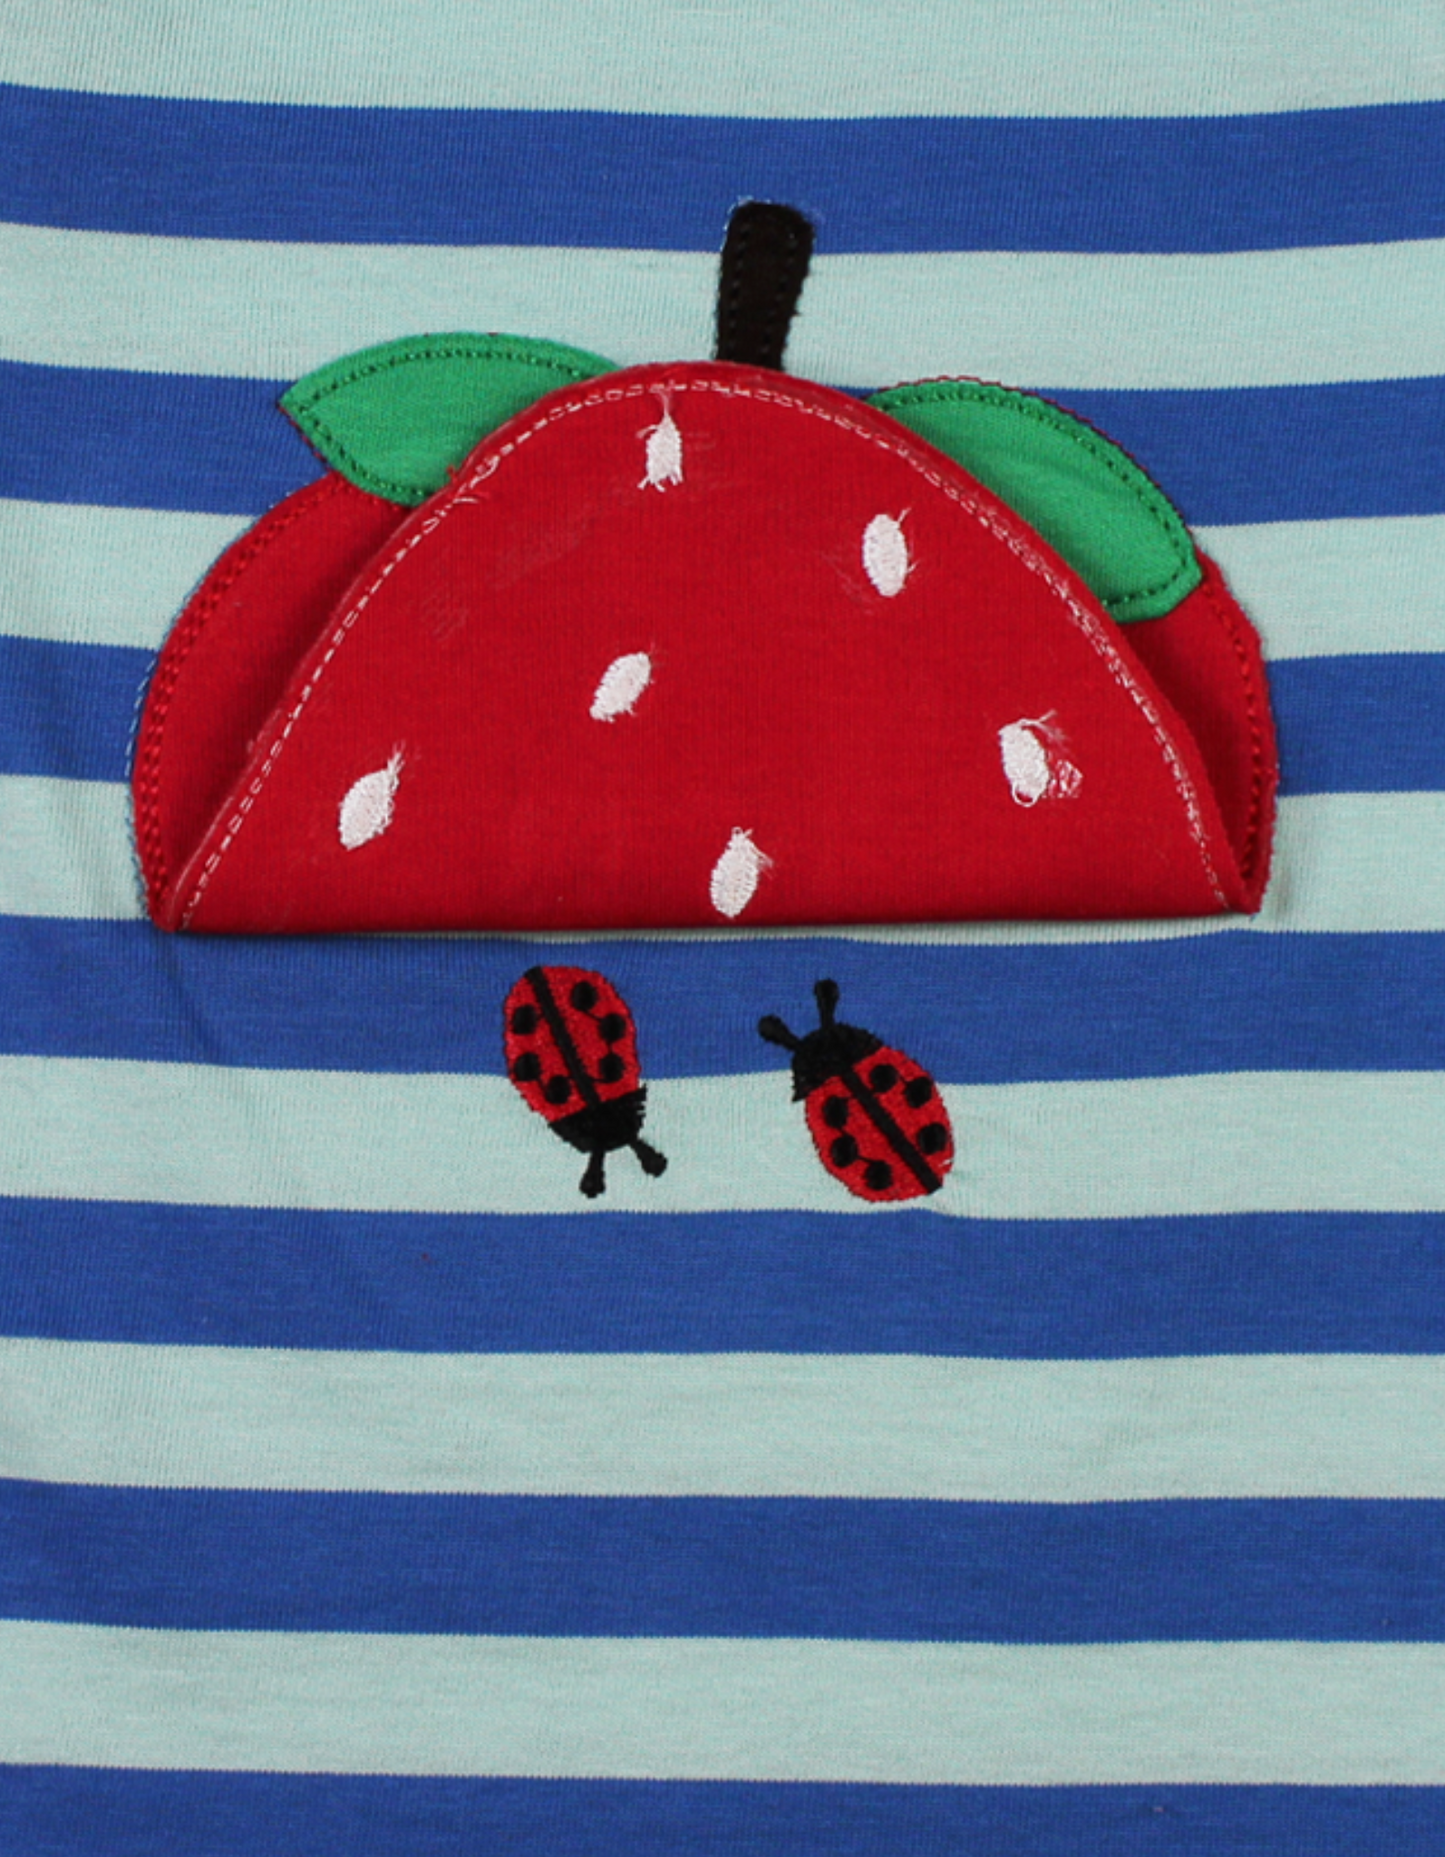 Organic cotton short-sleeved shirt with strawberry appliqué